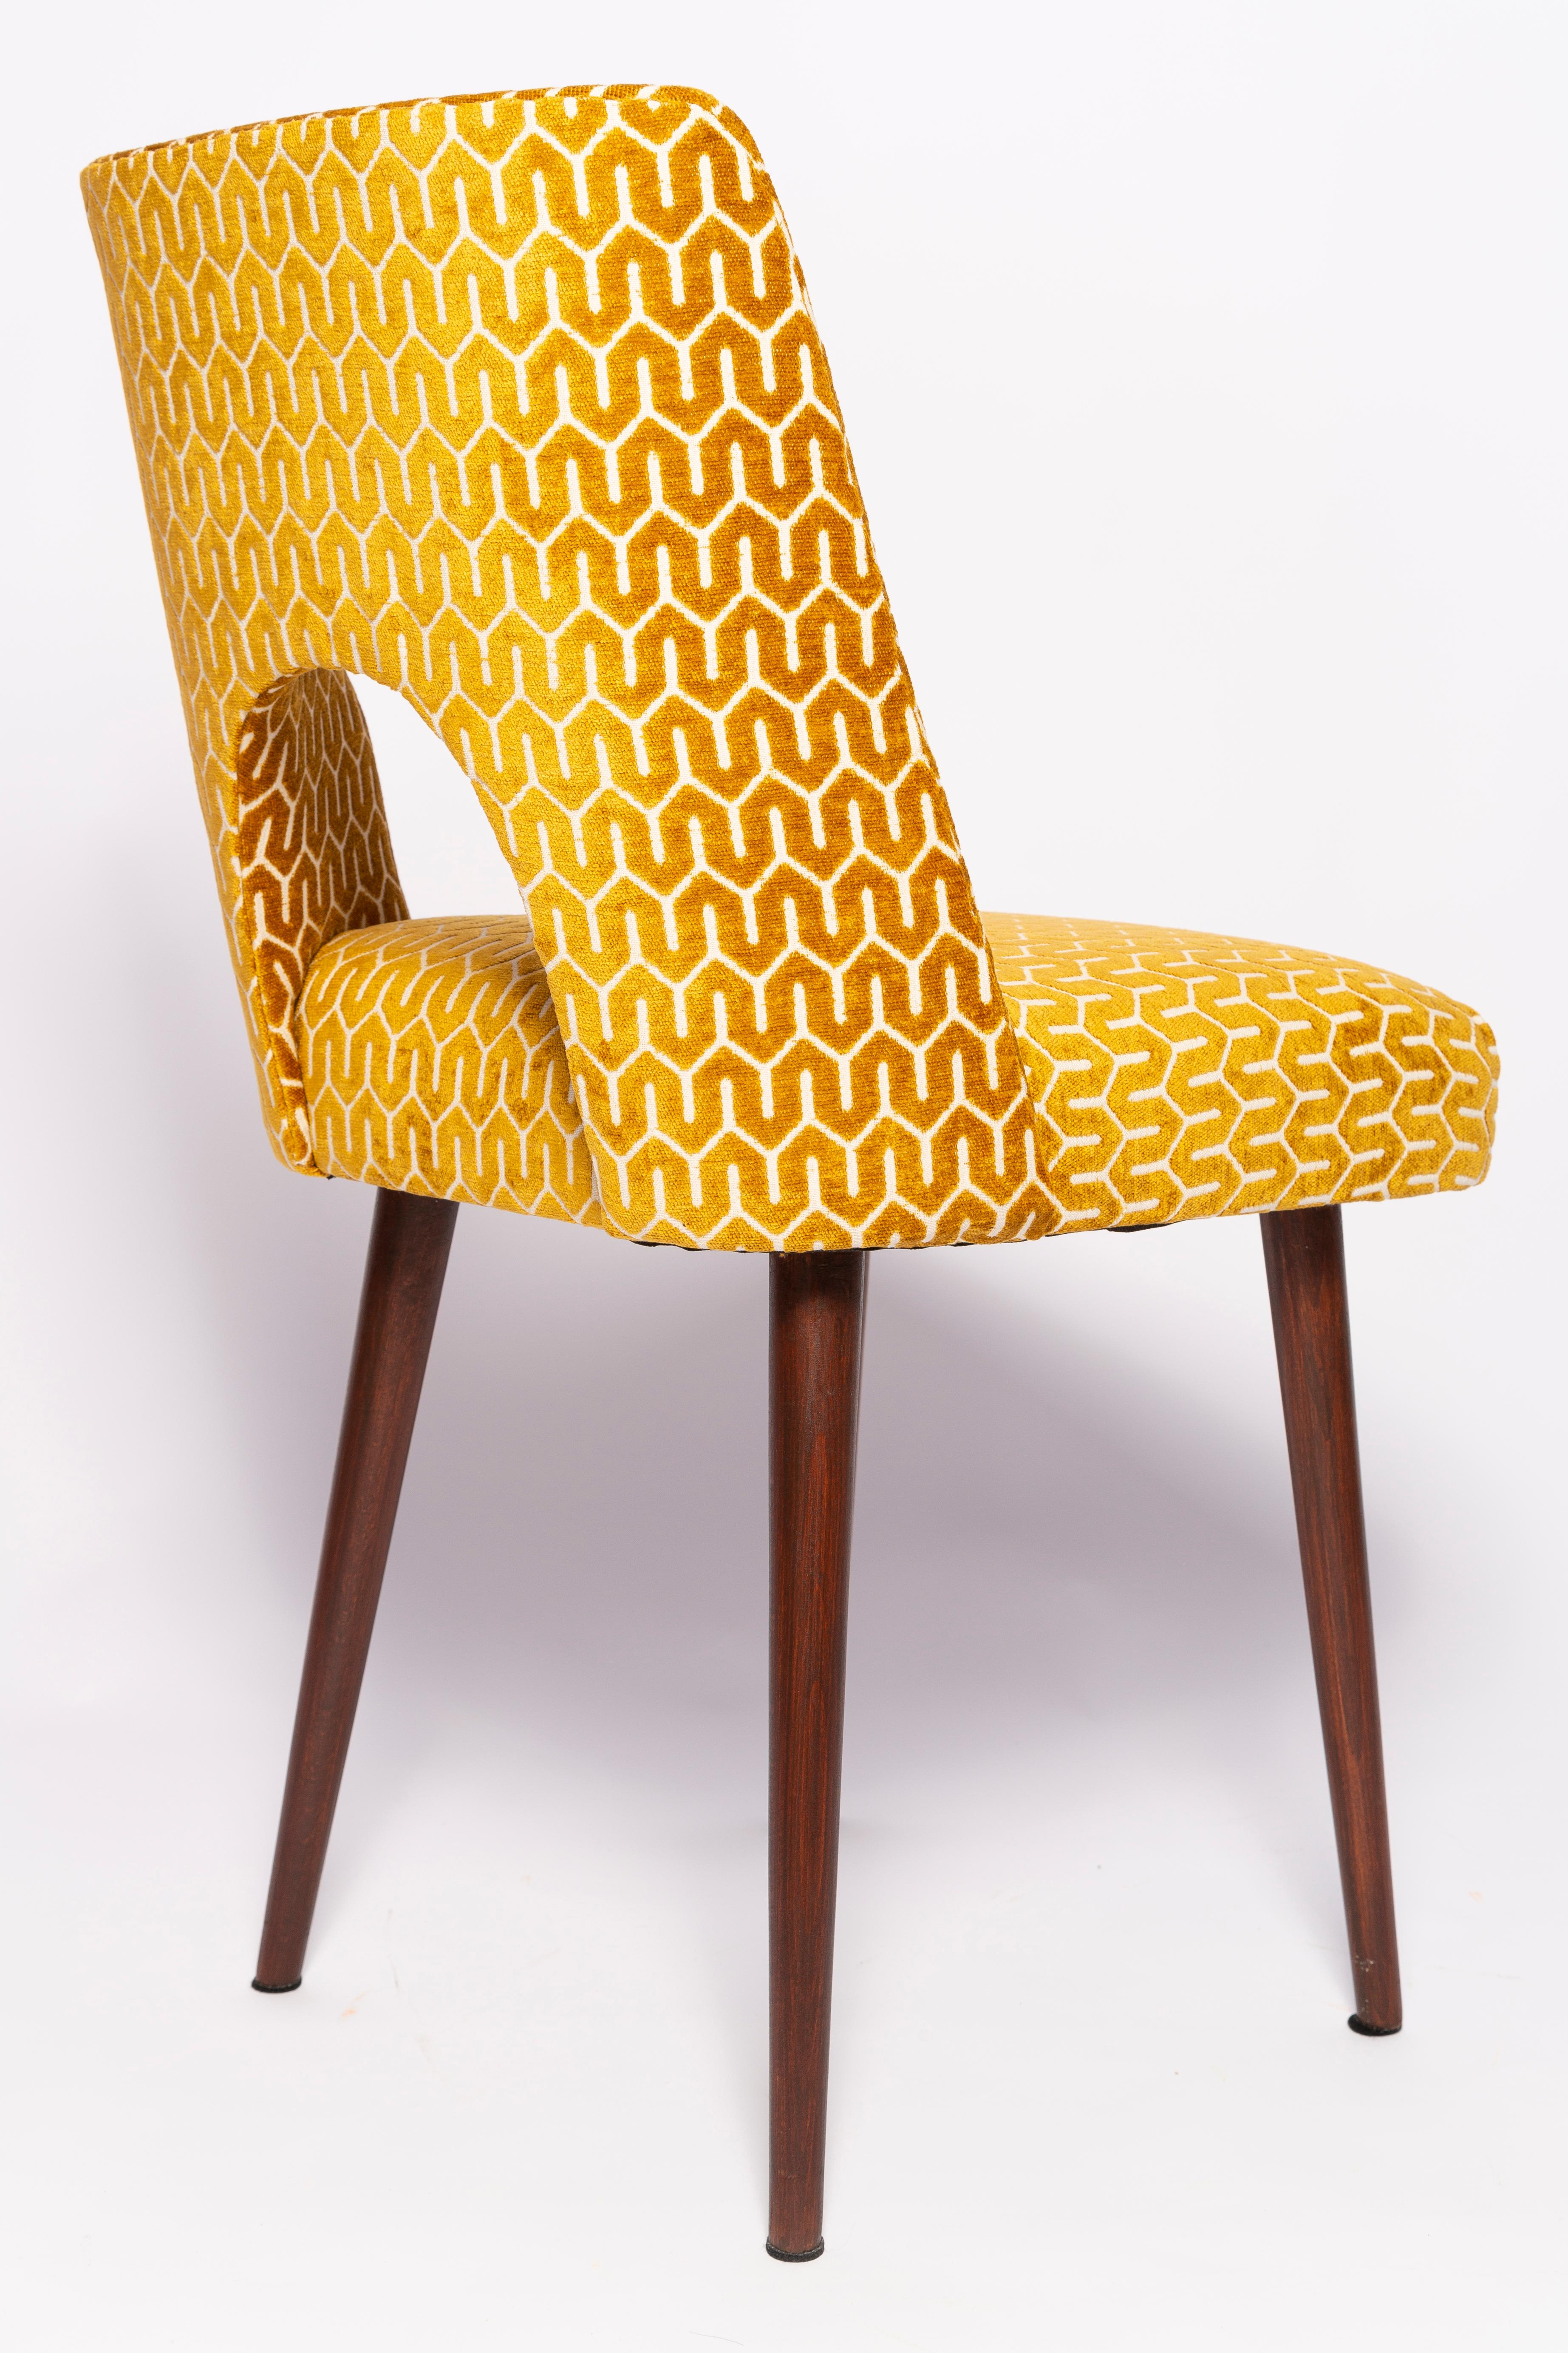 Polish Mid-Century Yellow Mustard 'Shell' Chair, Europe, 1960s For Sale